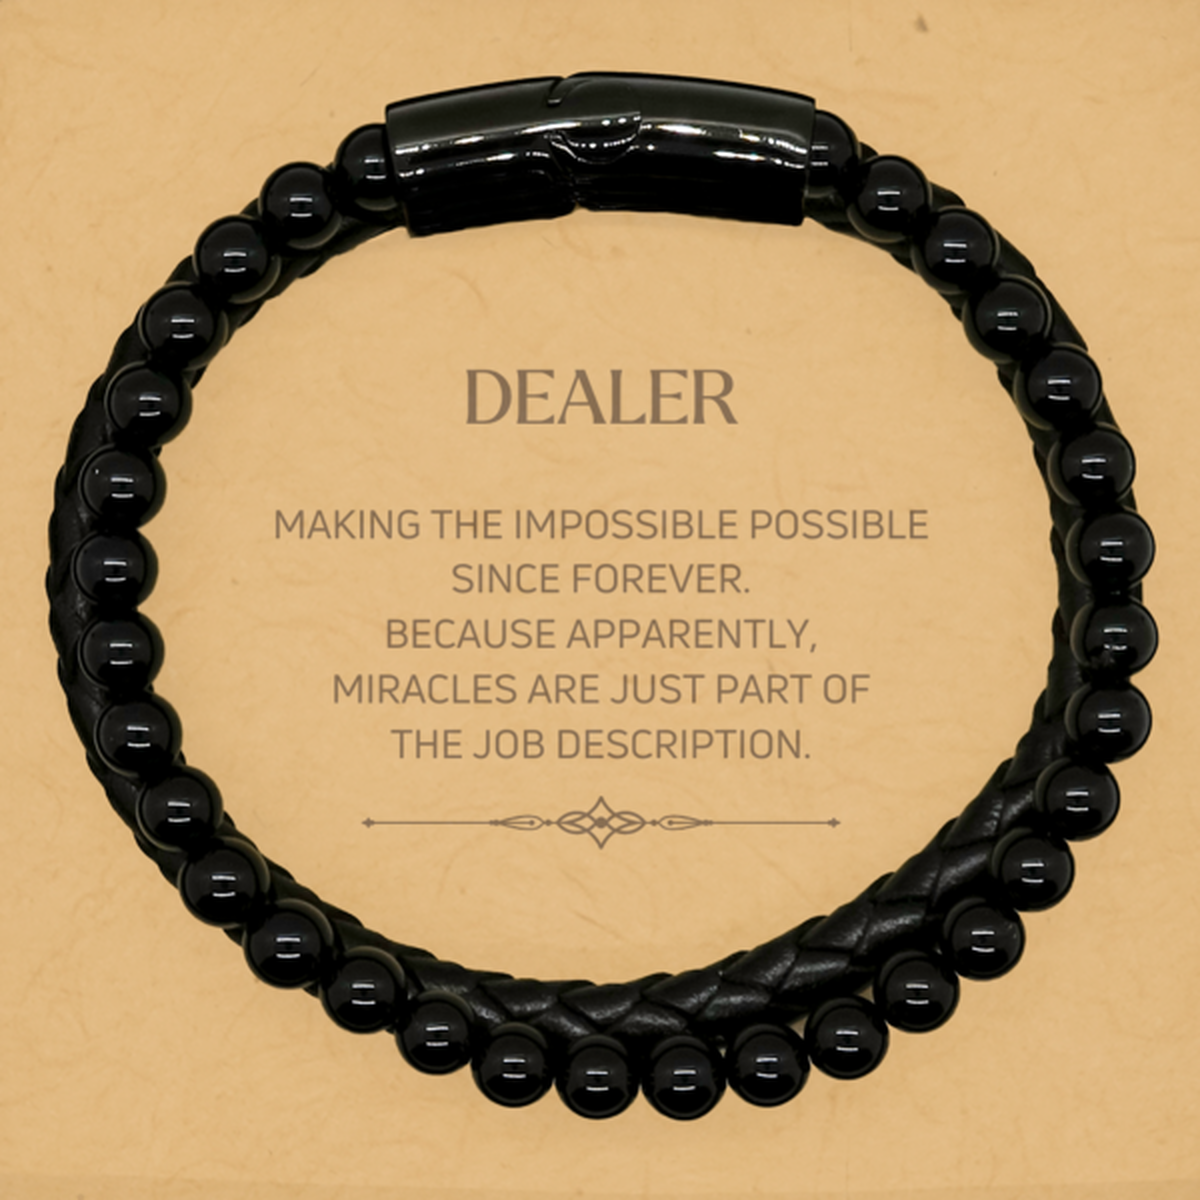 Funny Dealer Gifts, Miracles are just part of the job description, Inspirational Birthday Stone Leather Bracelets For Dealer, Men, Women, Coworkers, Friends, Boss